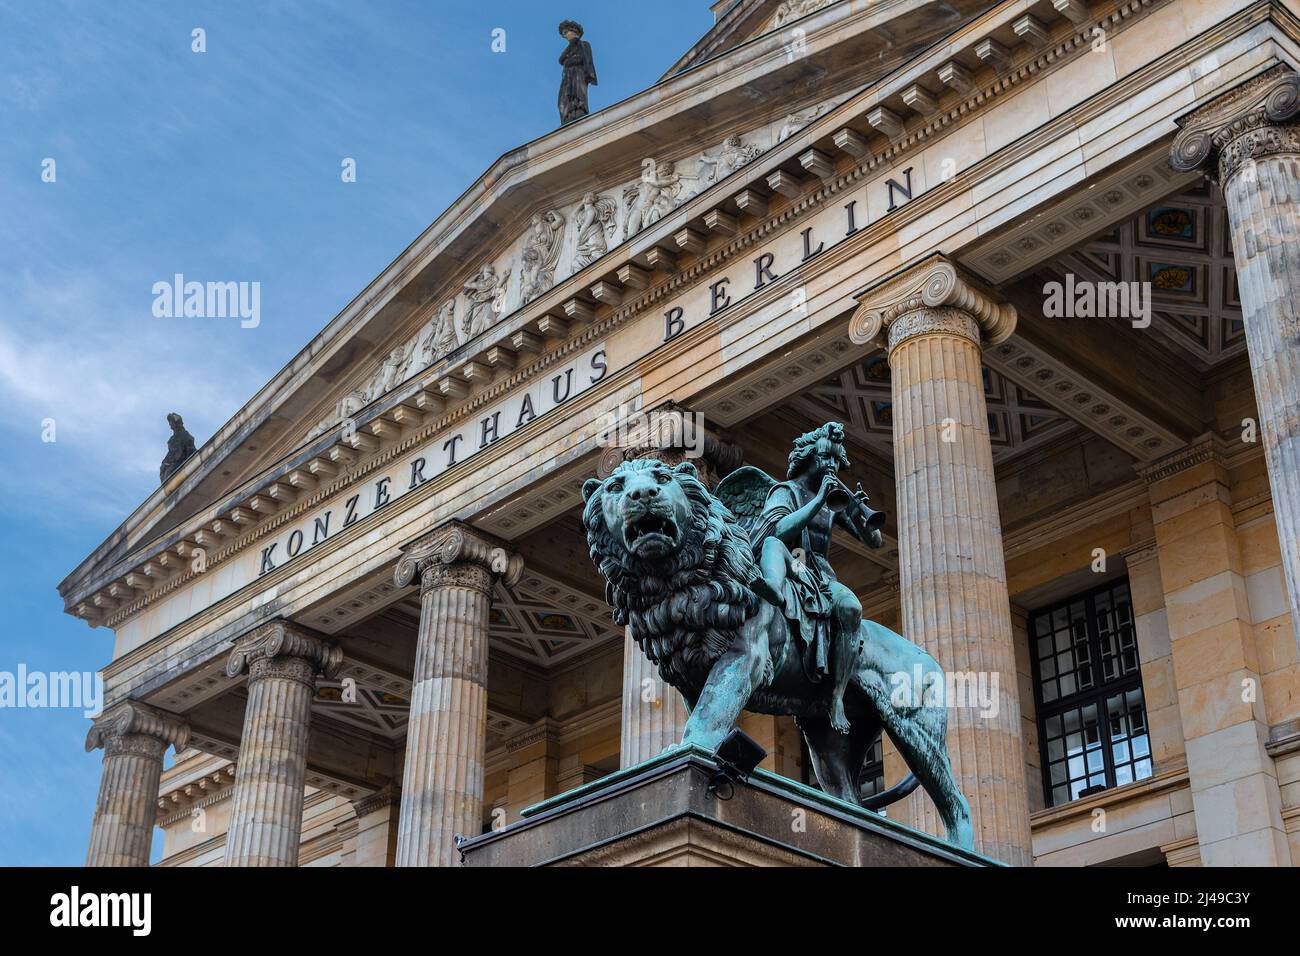 Bronze lion statue in front of the Berlin Concert Hall located in Gendarmenmarkt square, Germany. Stock Photo